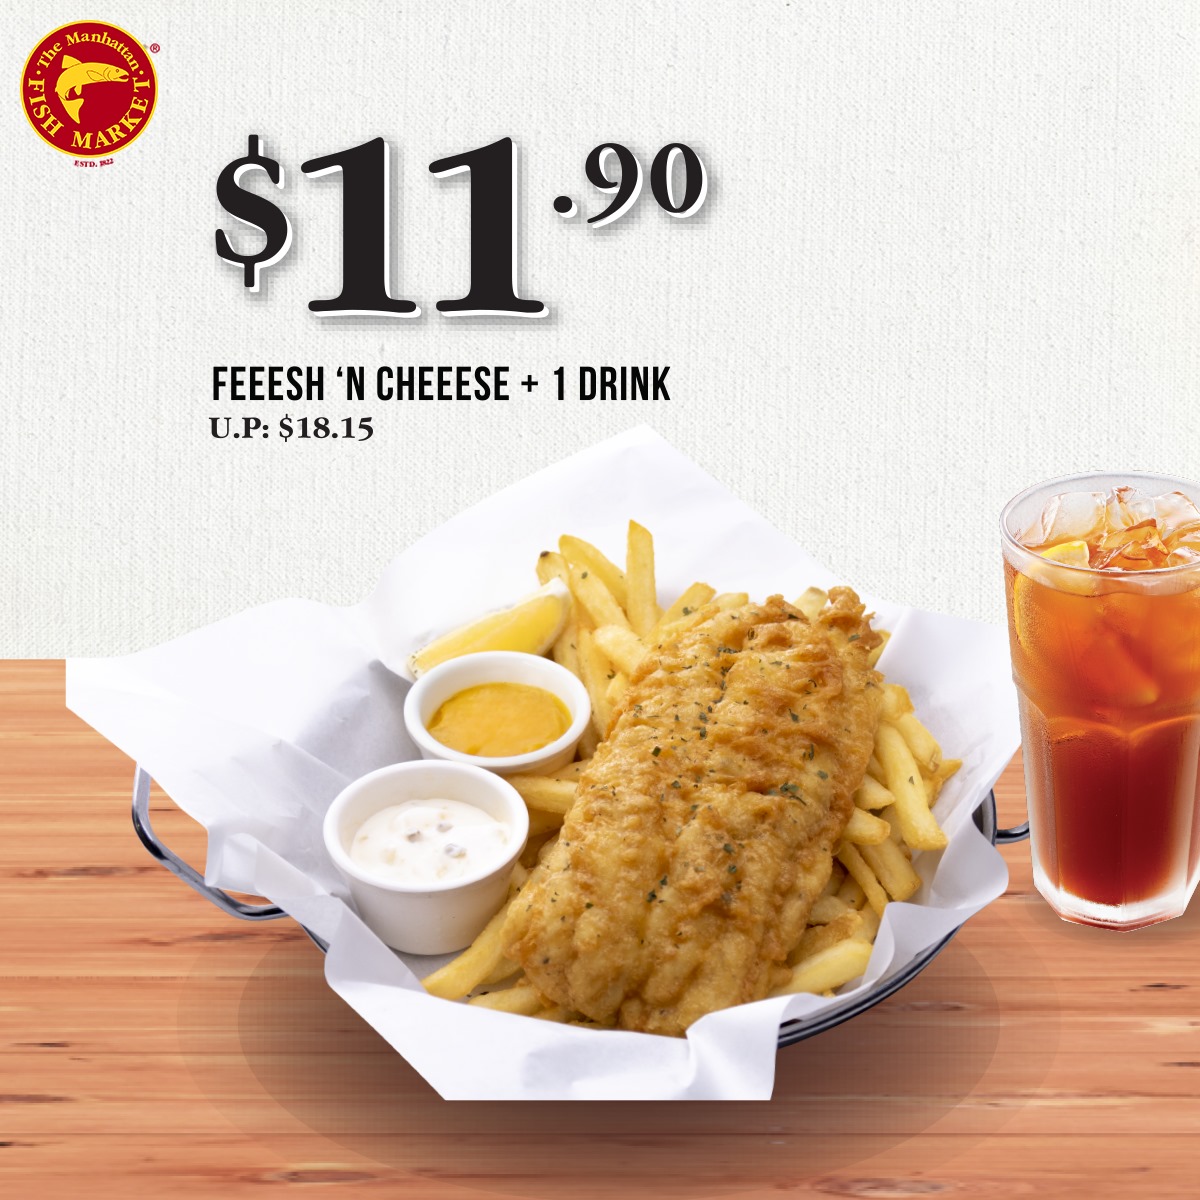 Flash these coupons from The Manhattan FISH MARKET on your mobile devices to enjoy great savings - 4